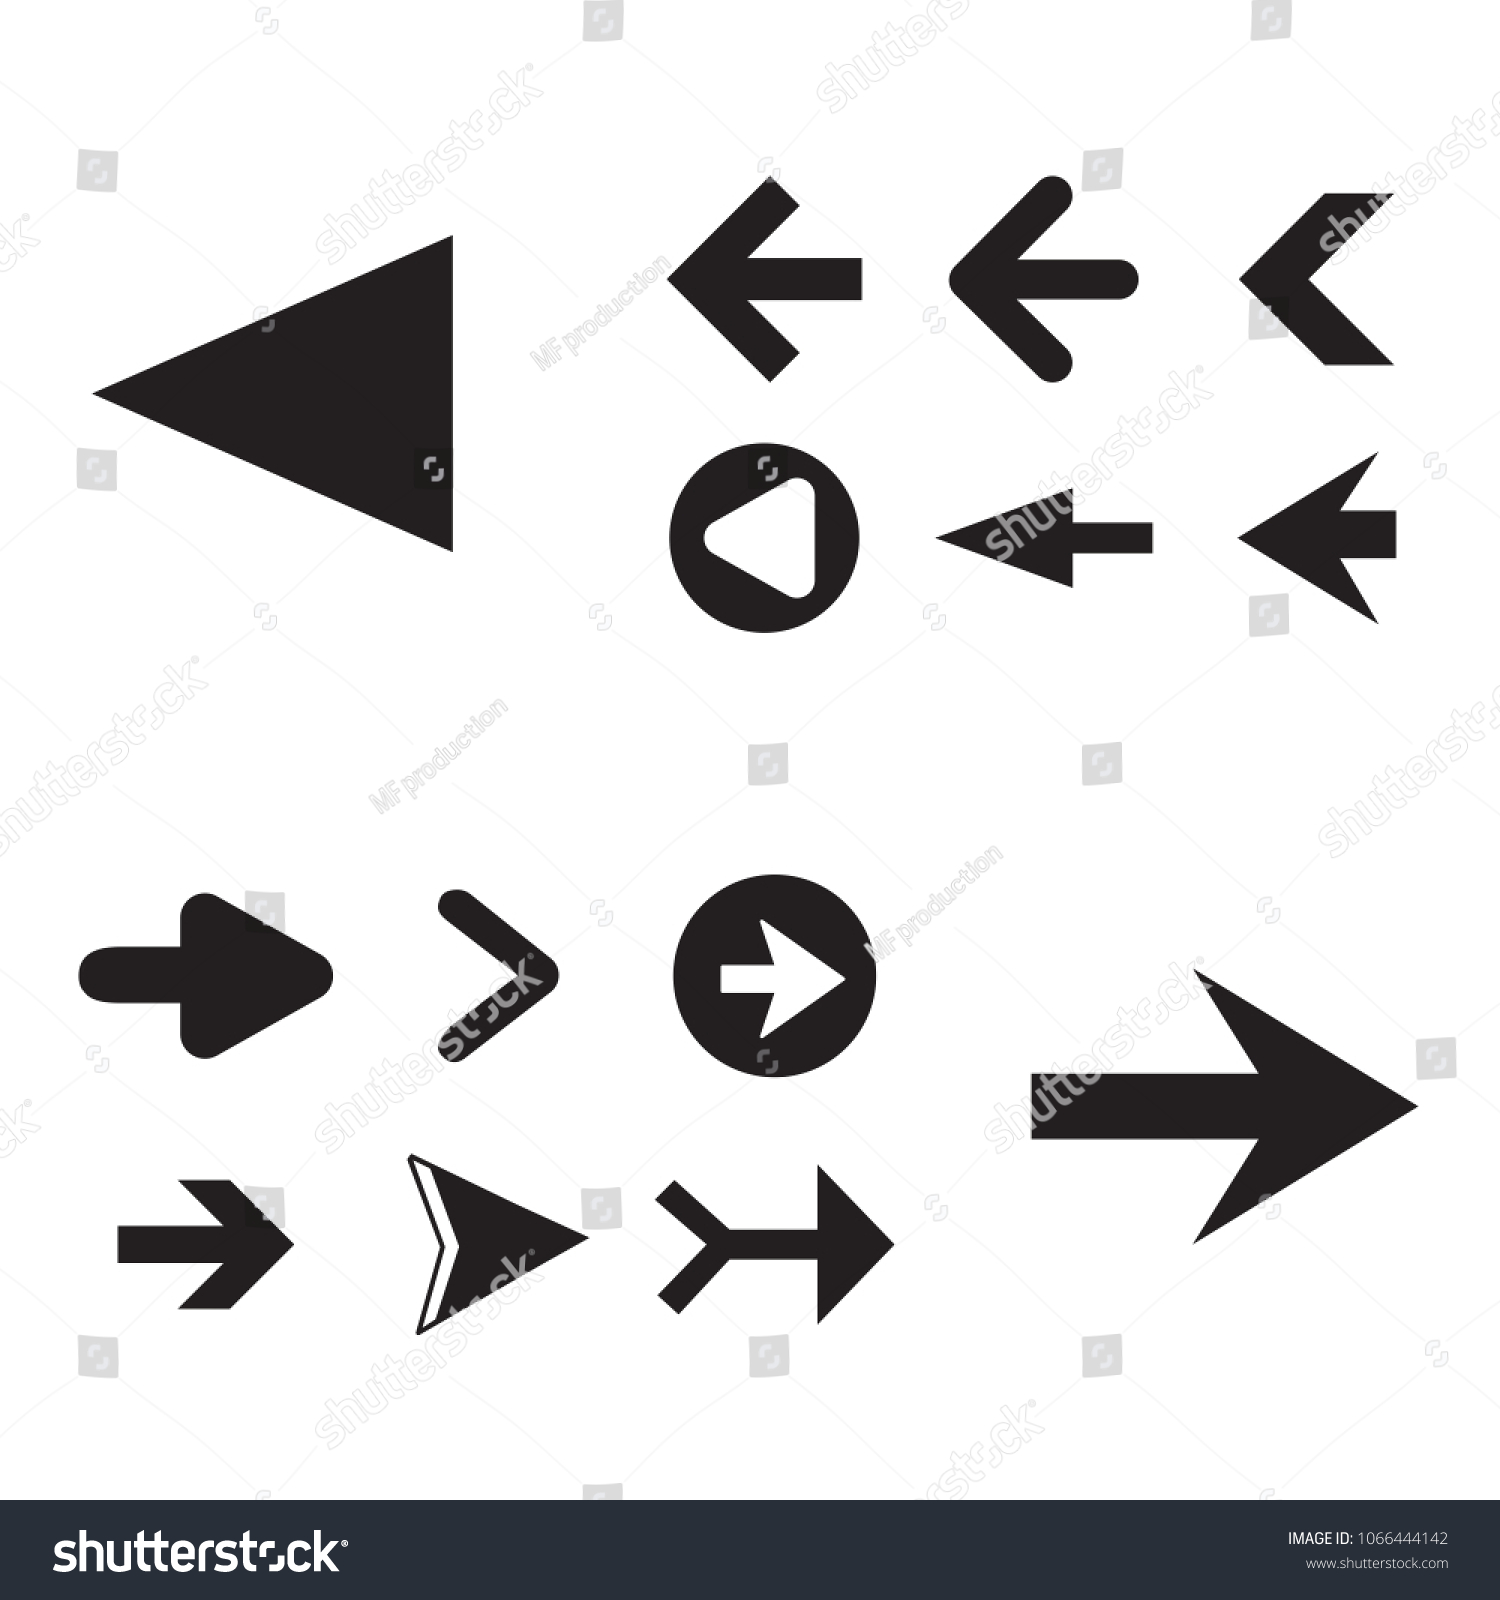 Arrow icon set isolated on white background. Trendy collection of different arrow icons in flat style for web site. Cretive arrow template for app, ui and logo, vector illustration eps 10 #1066444142